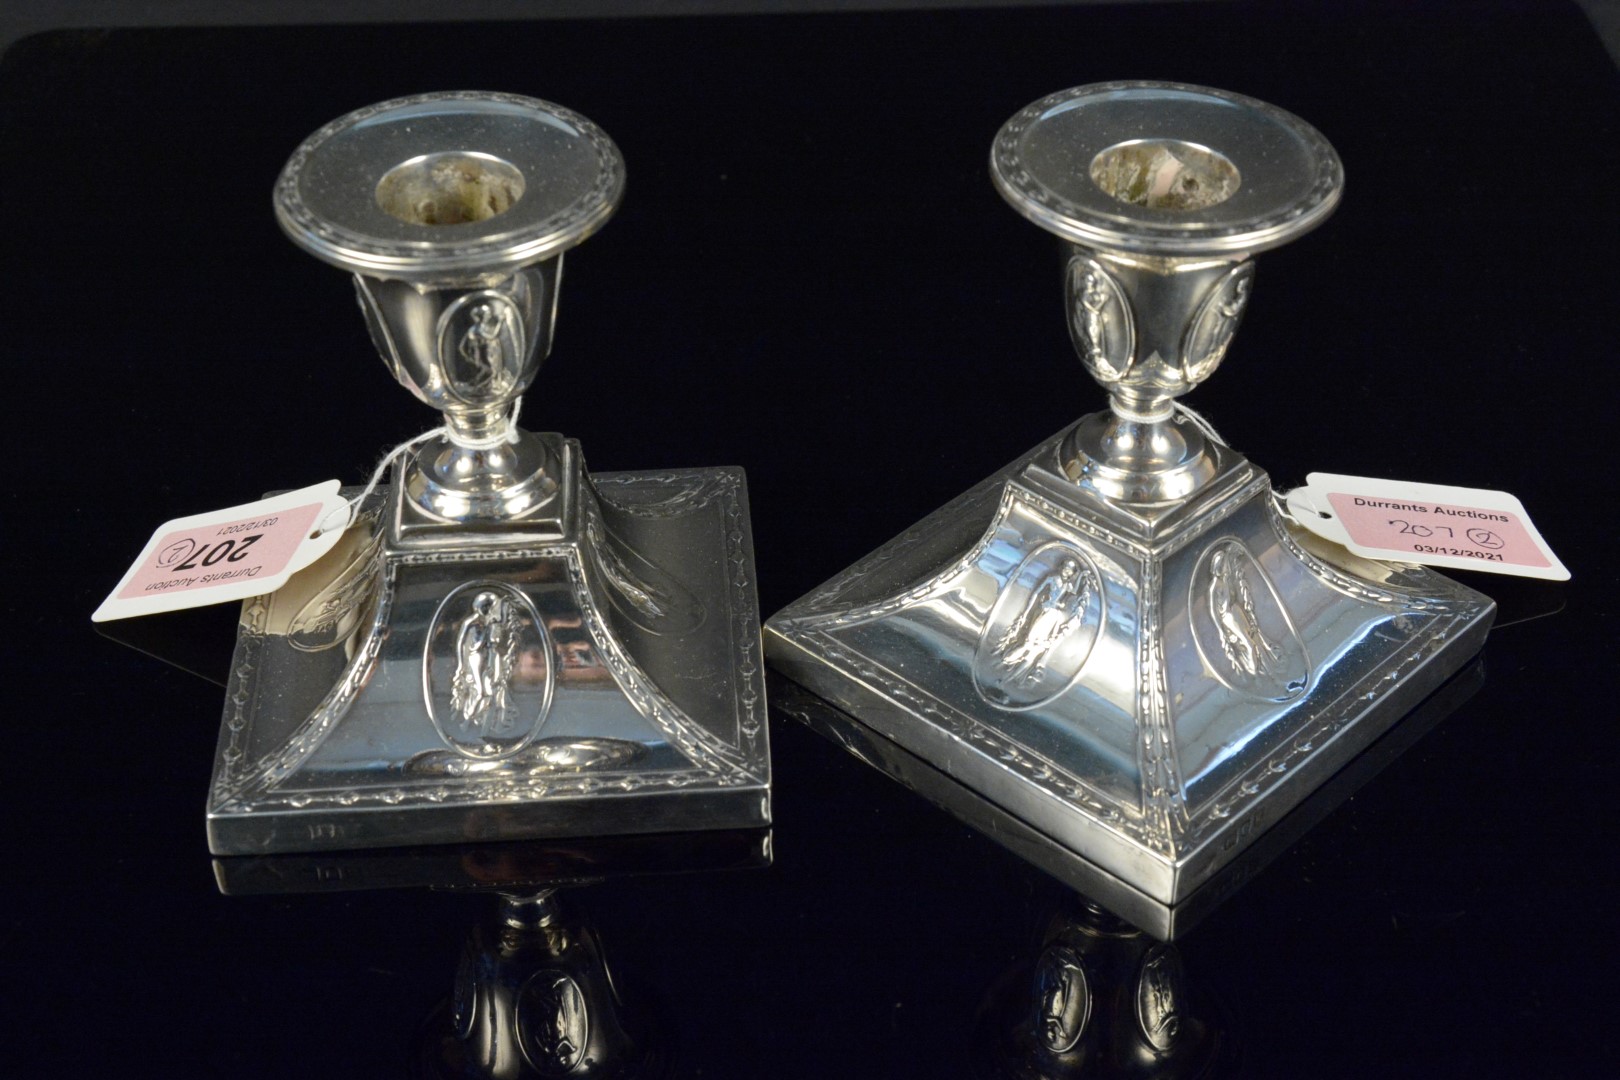 A pair of Adams style silver candlesticks with embossed images of Greek women and floral swag